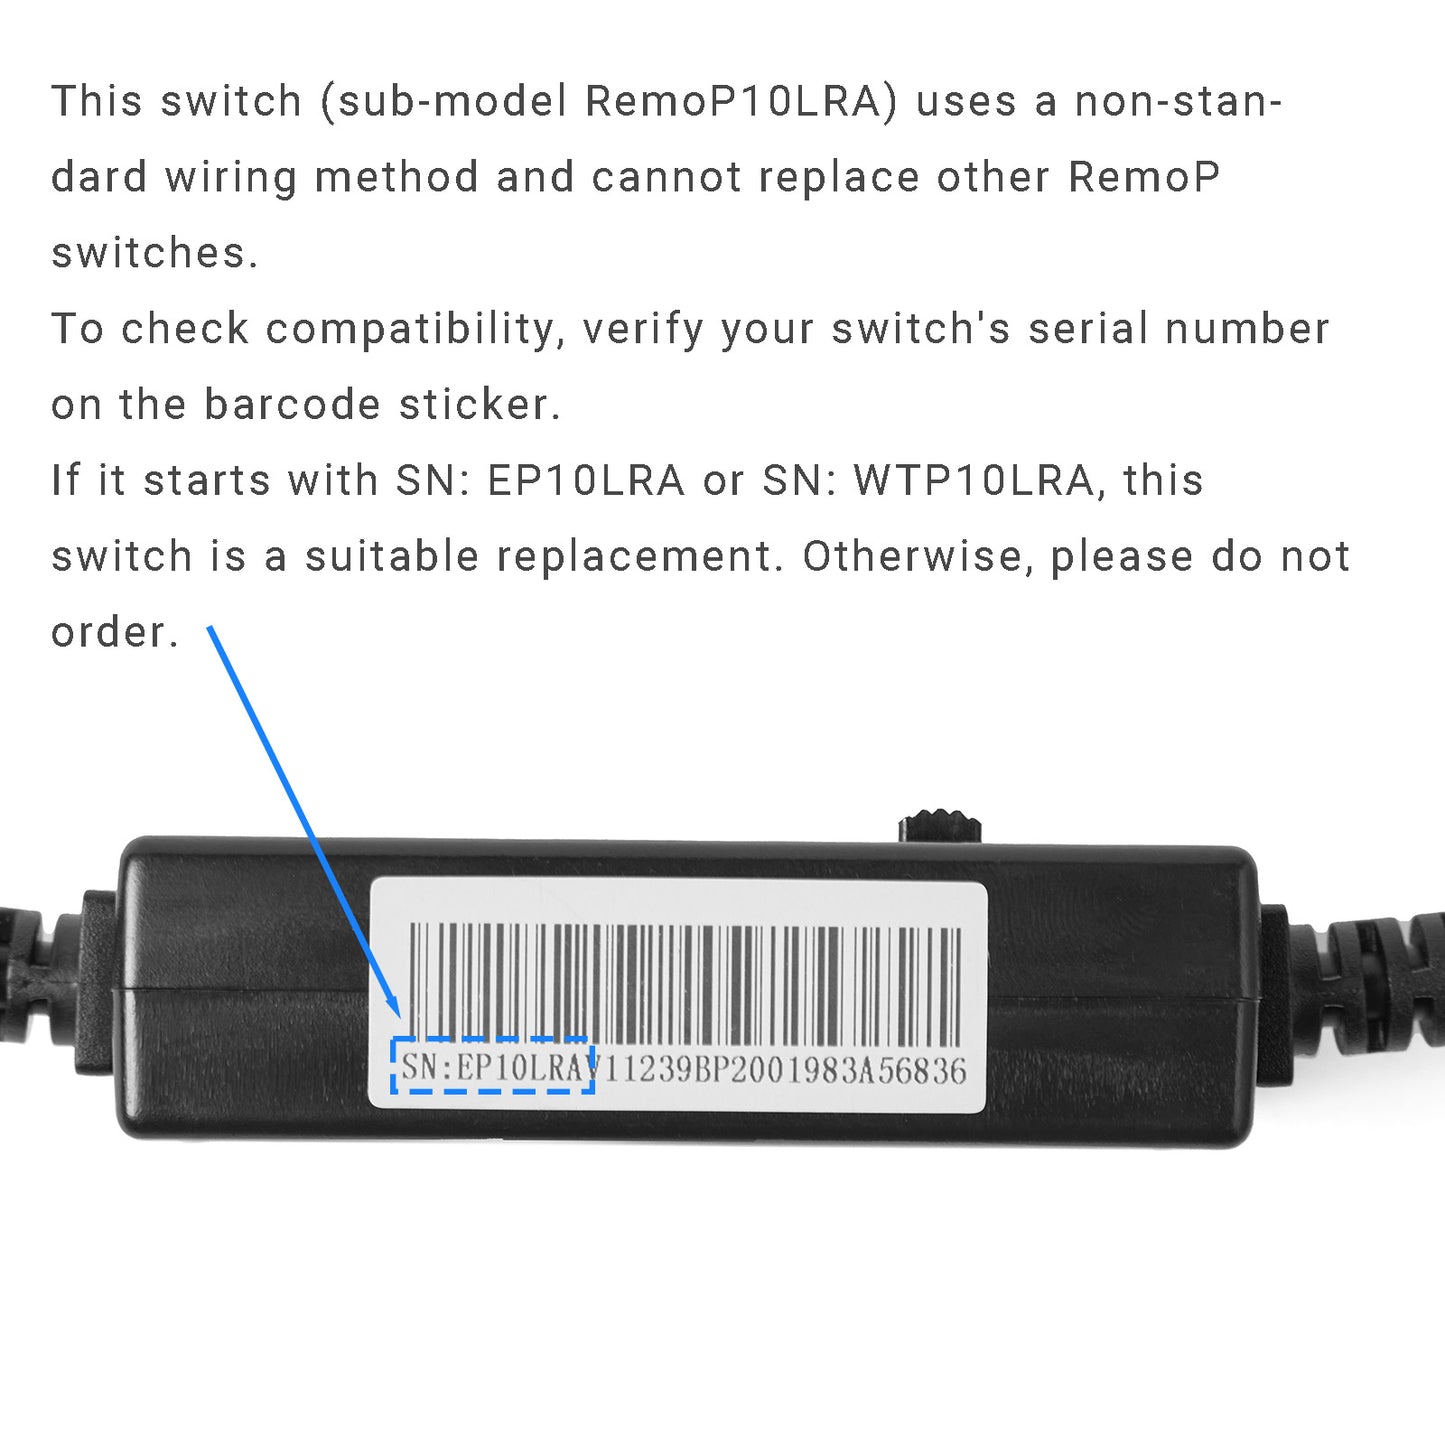 eMoMo RemoP10LRA 2 Button Fixed Switch With USB charging port